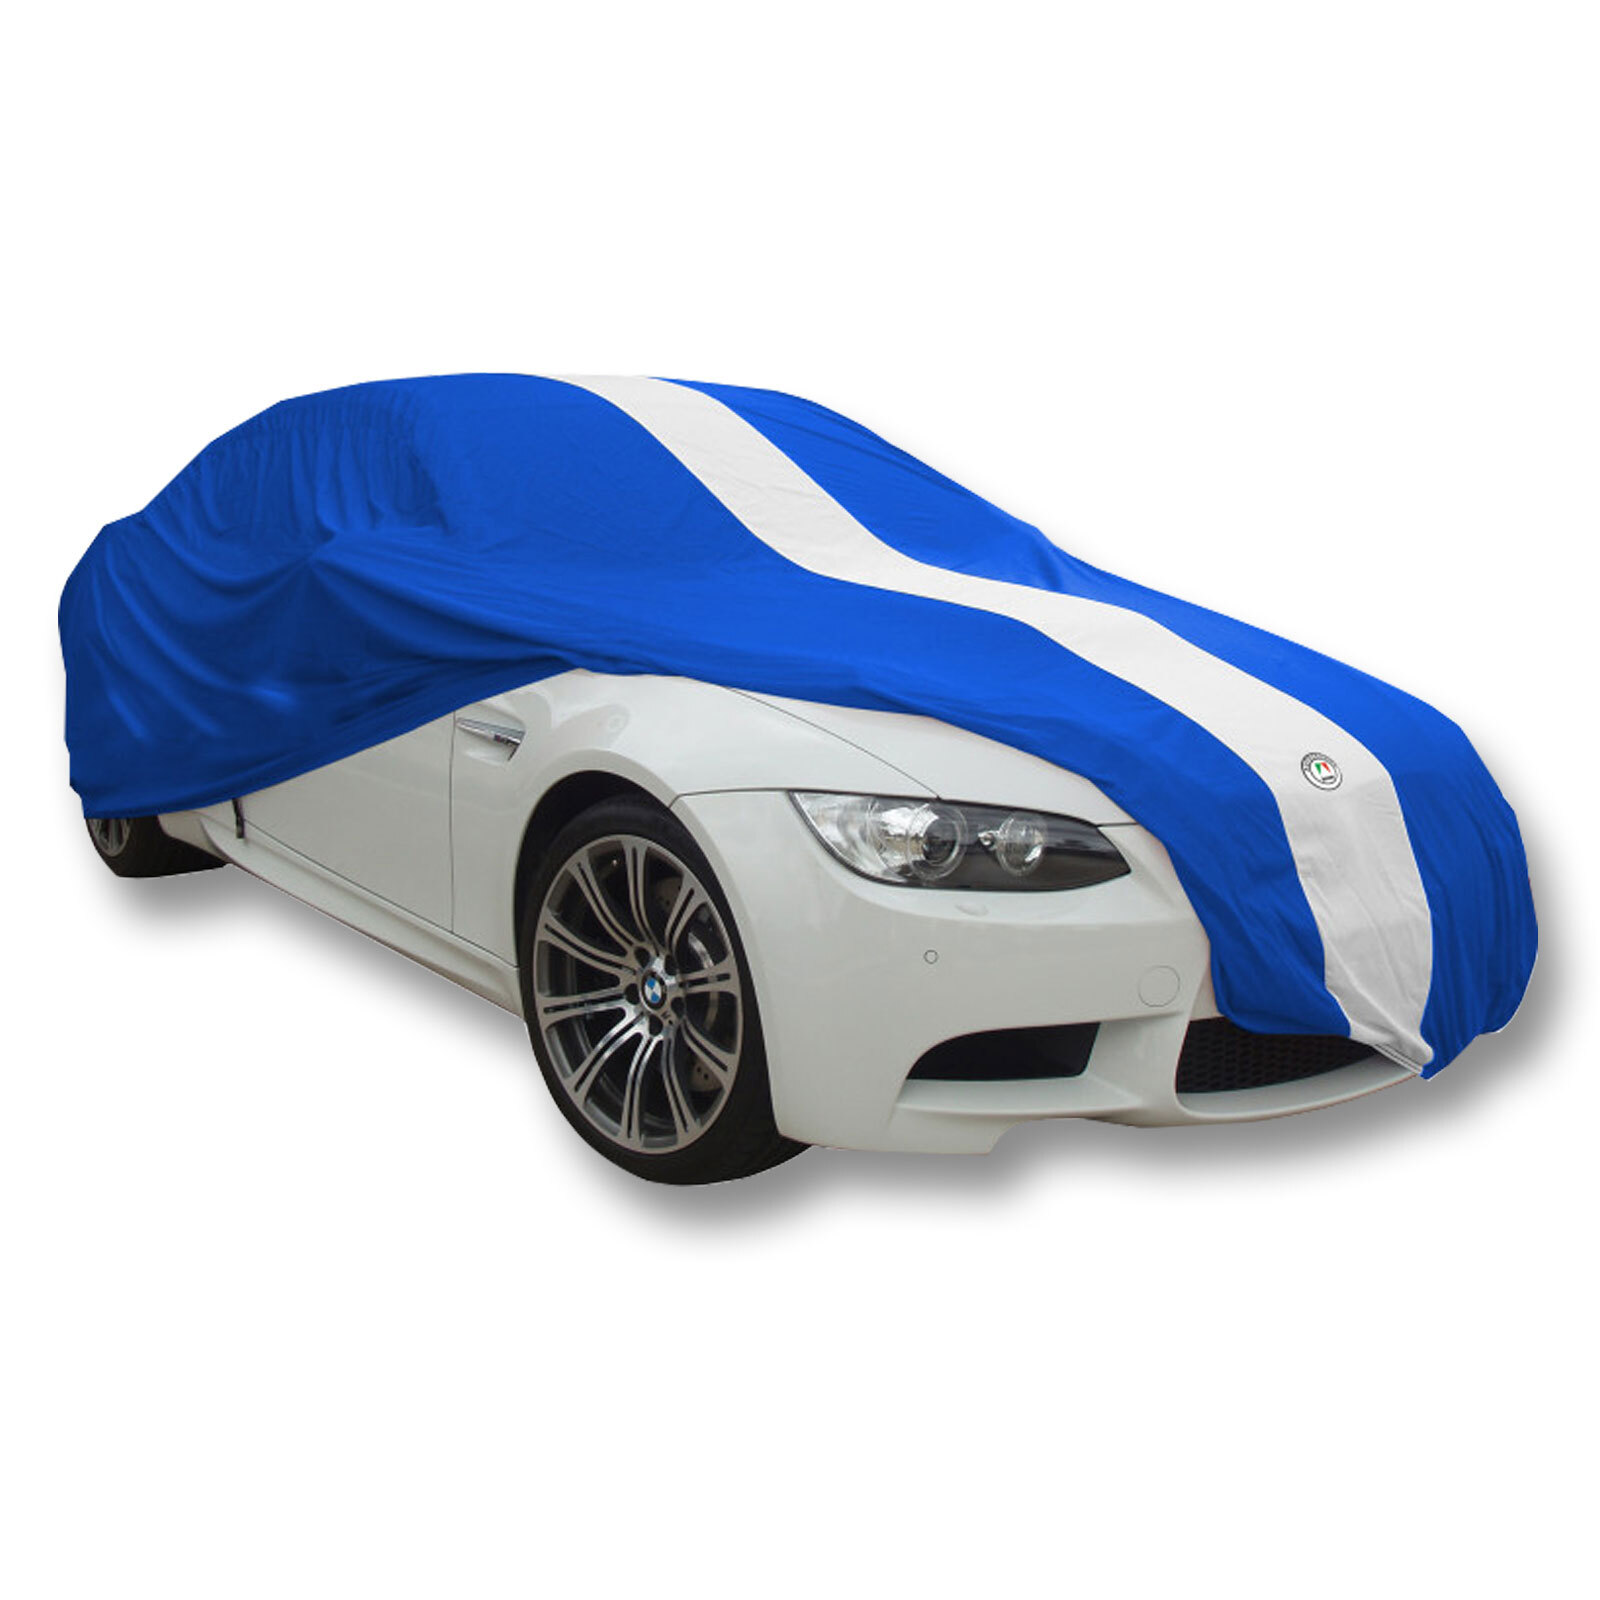 Autotecnica Blue Show Car Cover Large 4.9M Ford Mustang 1966 Autobox